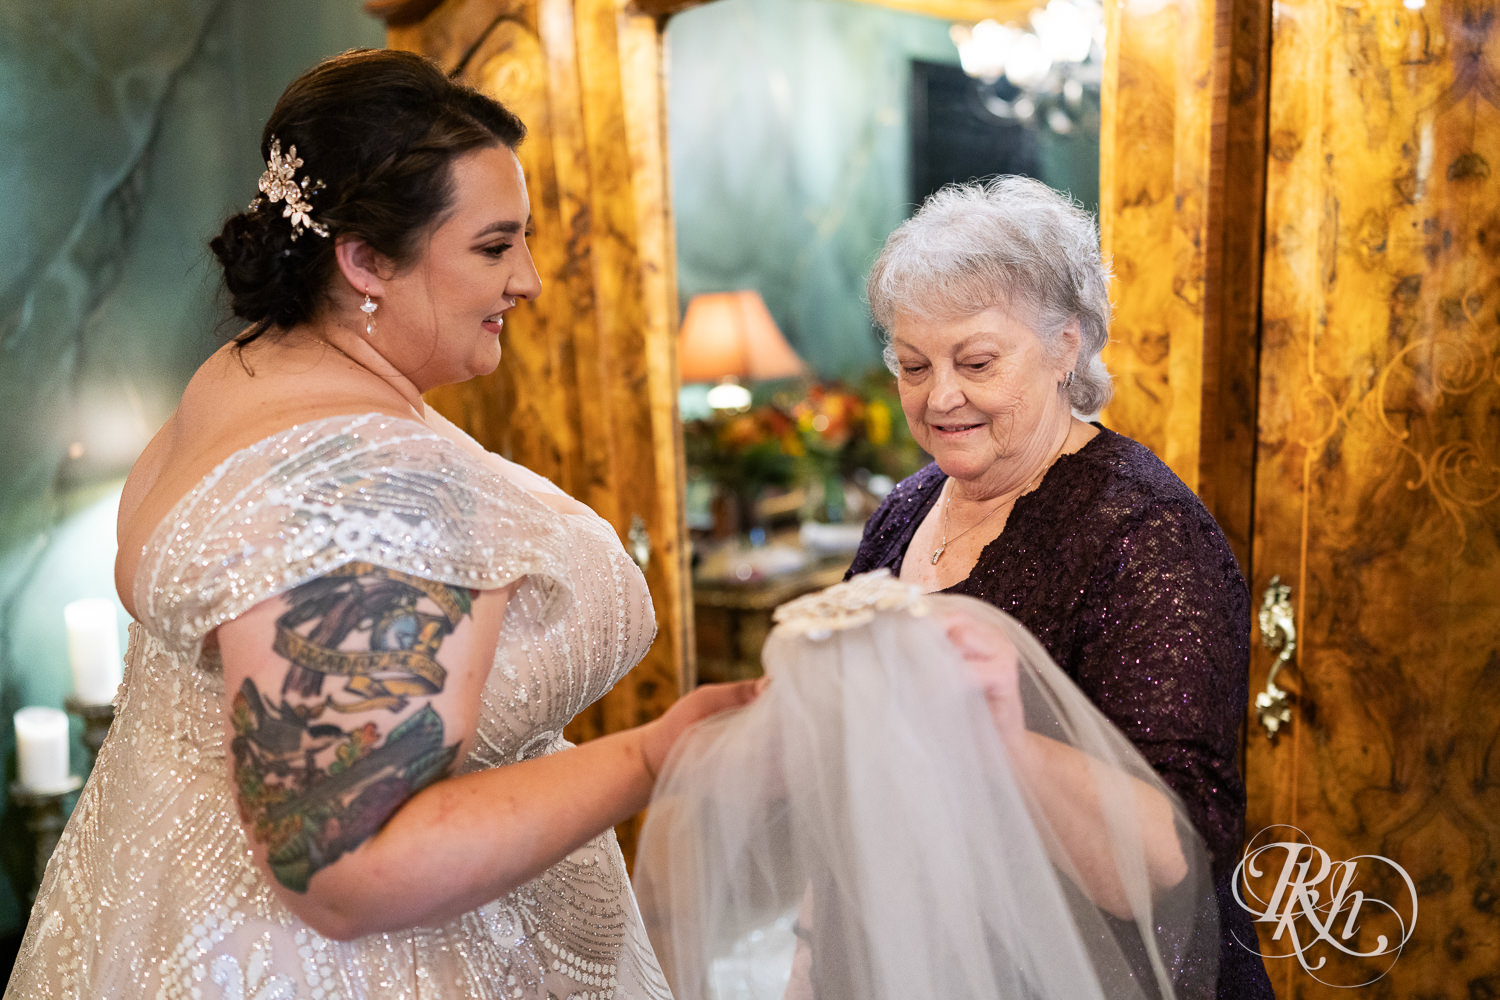 Plus size bride getting ready for wedding at Kellerman's Event Center in White Bear Lake, Minnesota.